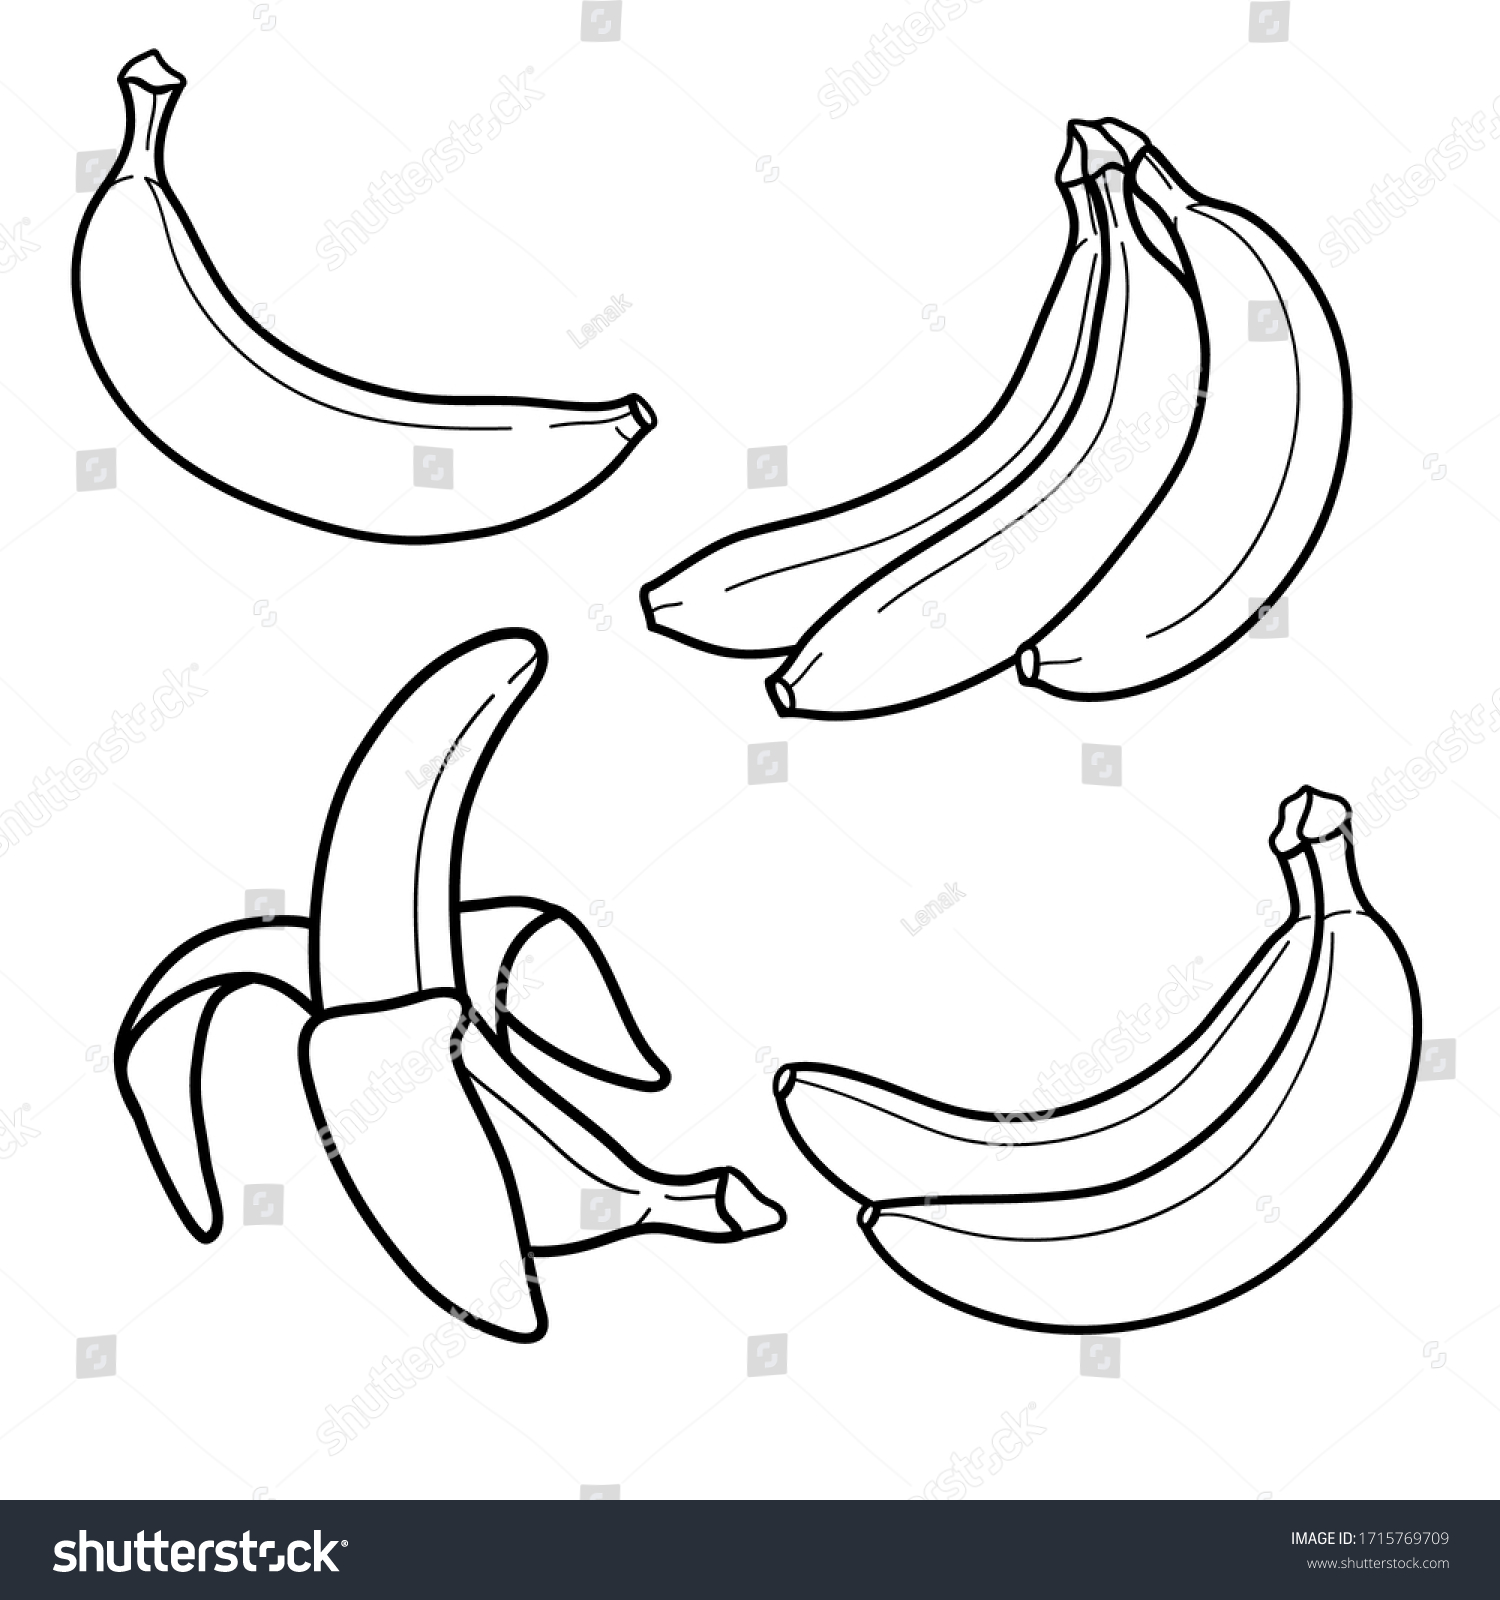 Linear drawing banana isolated on white background. Sketch for coloring booking page. Vector illustration #1715769709